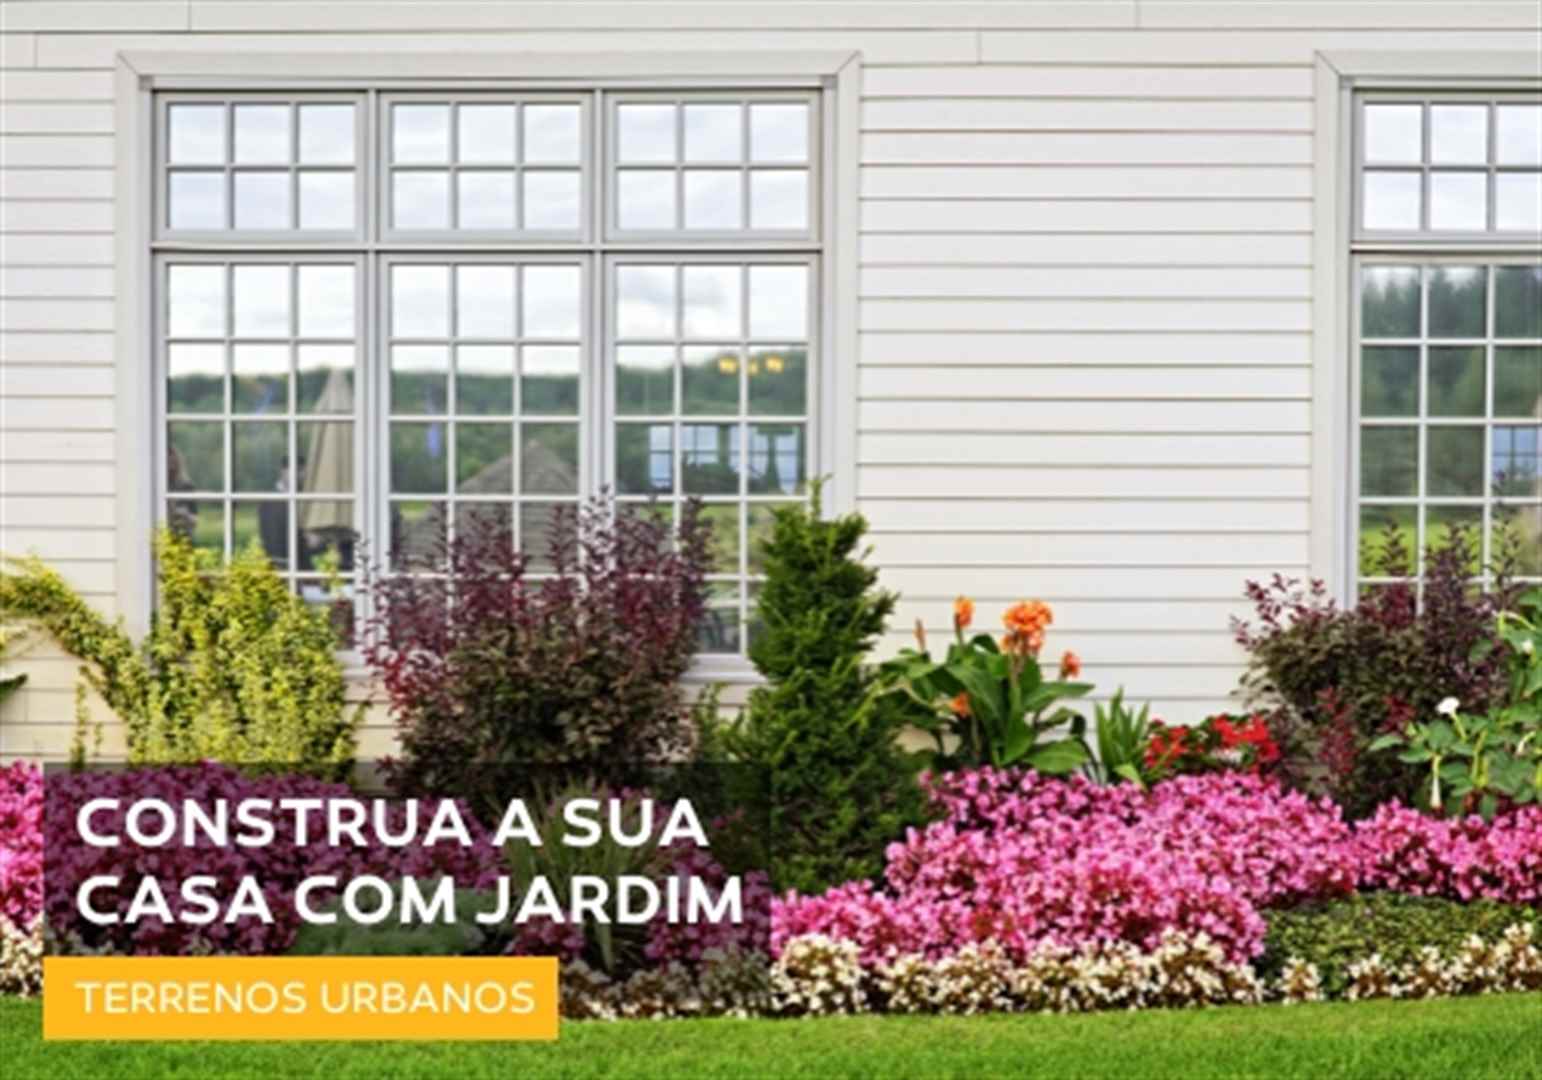 Build your house with garden | Urban lands